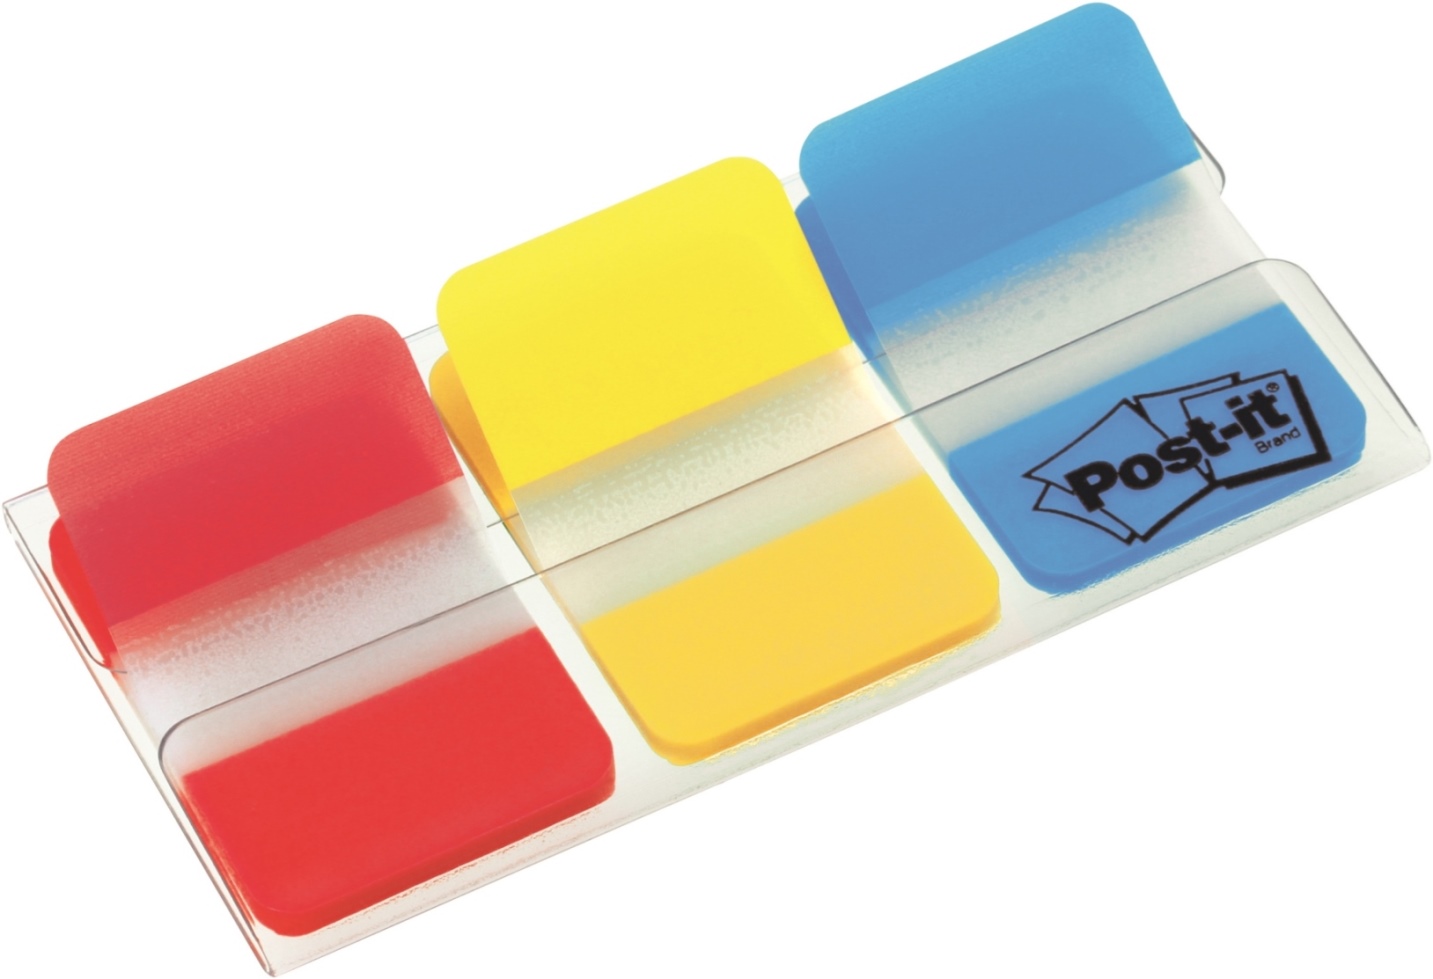 POST-IT Marque-pages standard 3x20 Rouge, Orange, Jaune ≡ CALIPAGE